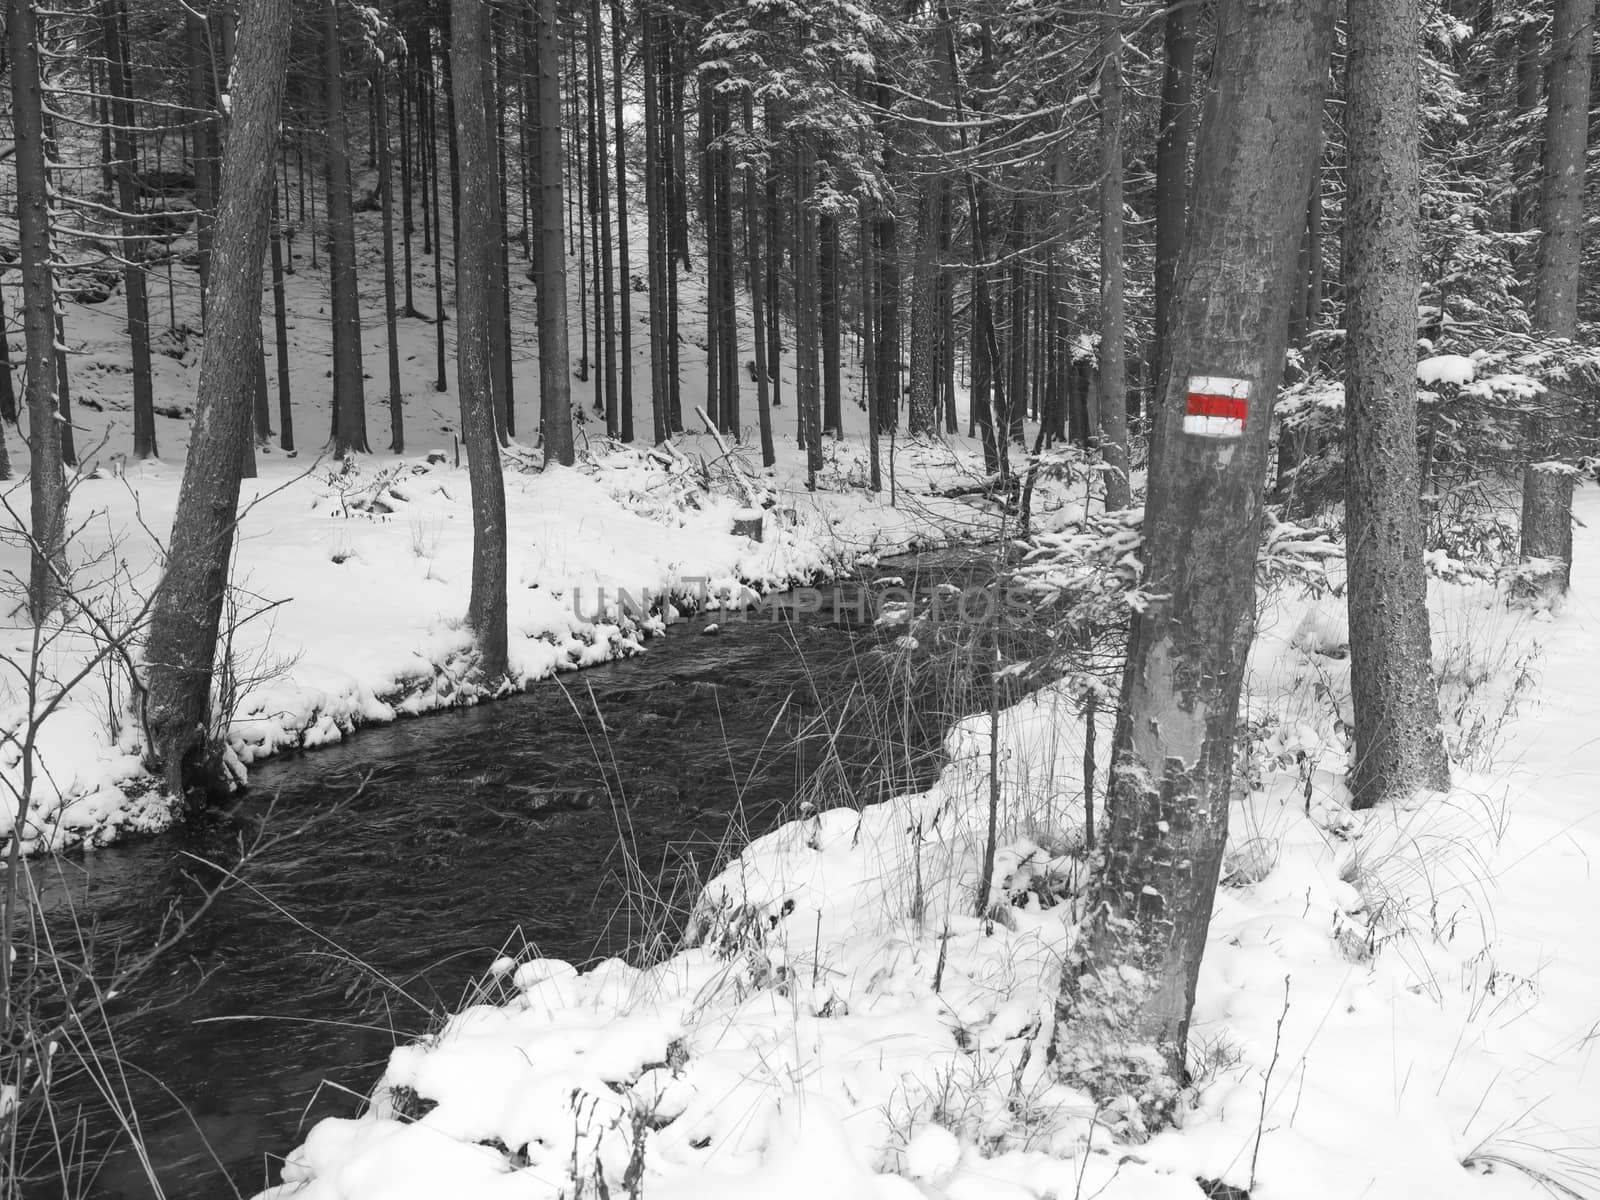 snow covered forest water stream creek with trees, branches and stones, idyllic winter landscape in black and white with red hiker sign by Henkeova